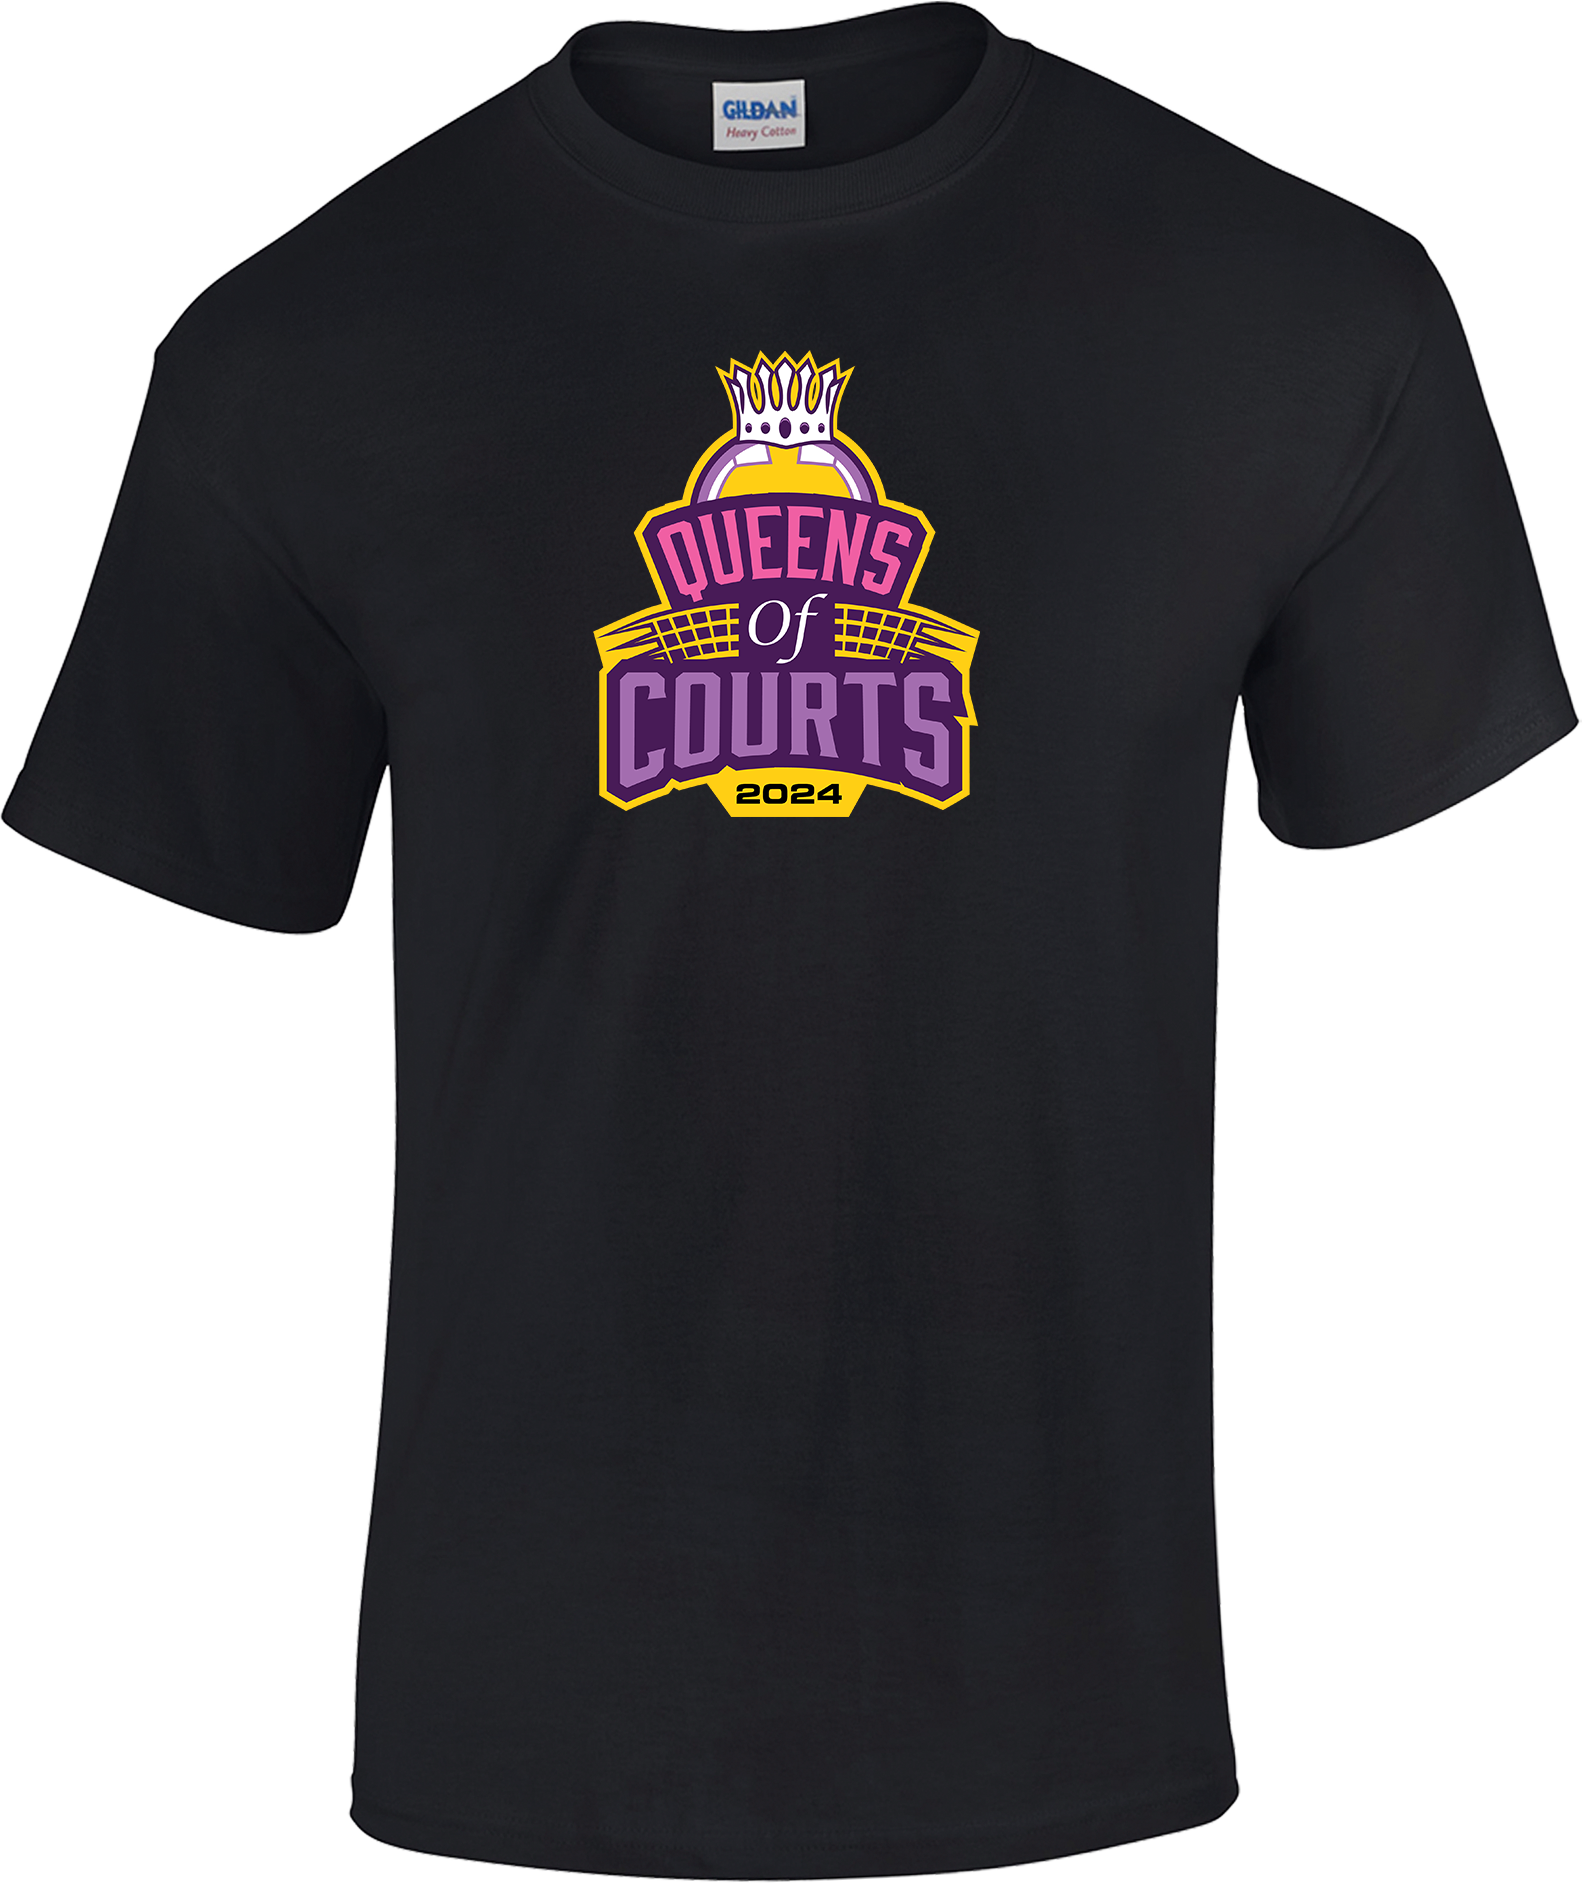 Short Sleeves - 2024 Queens Of Courts